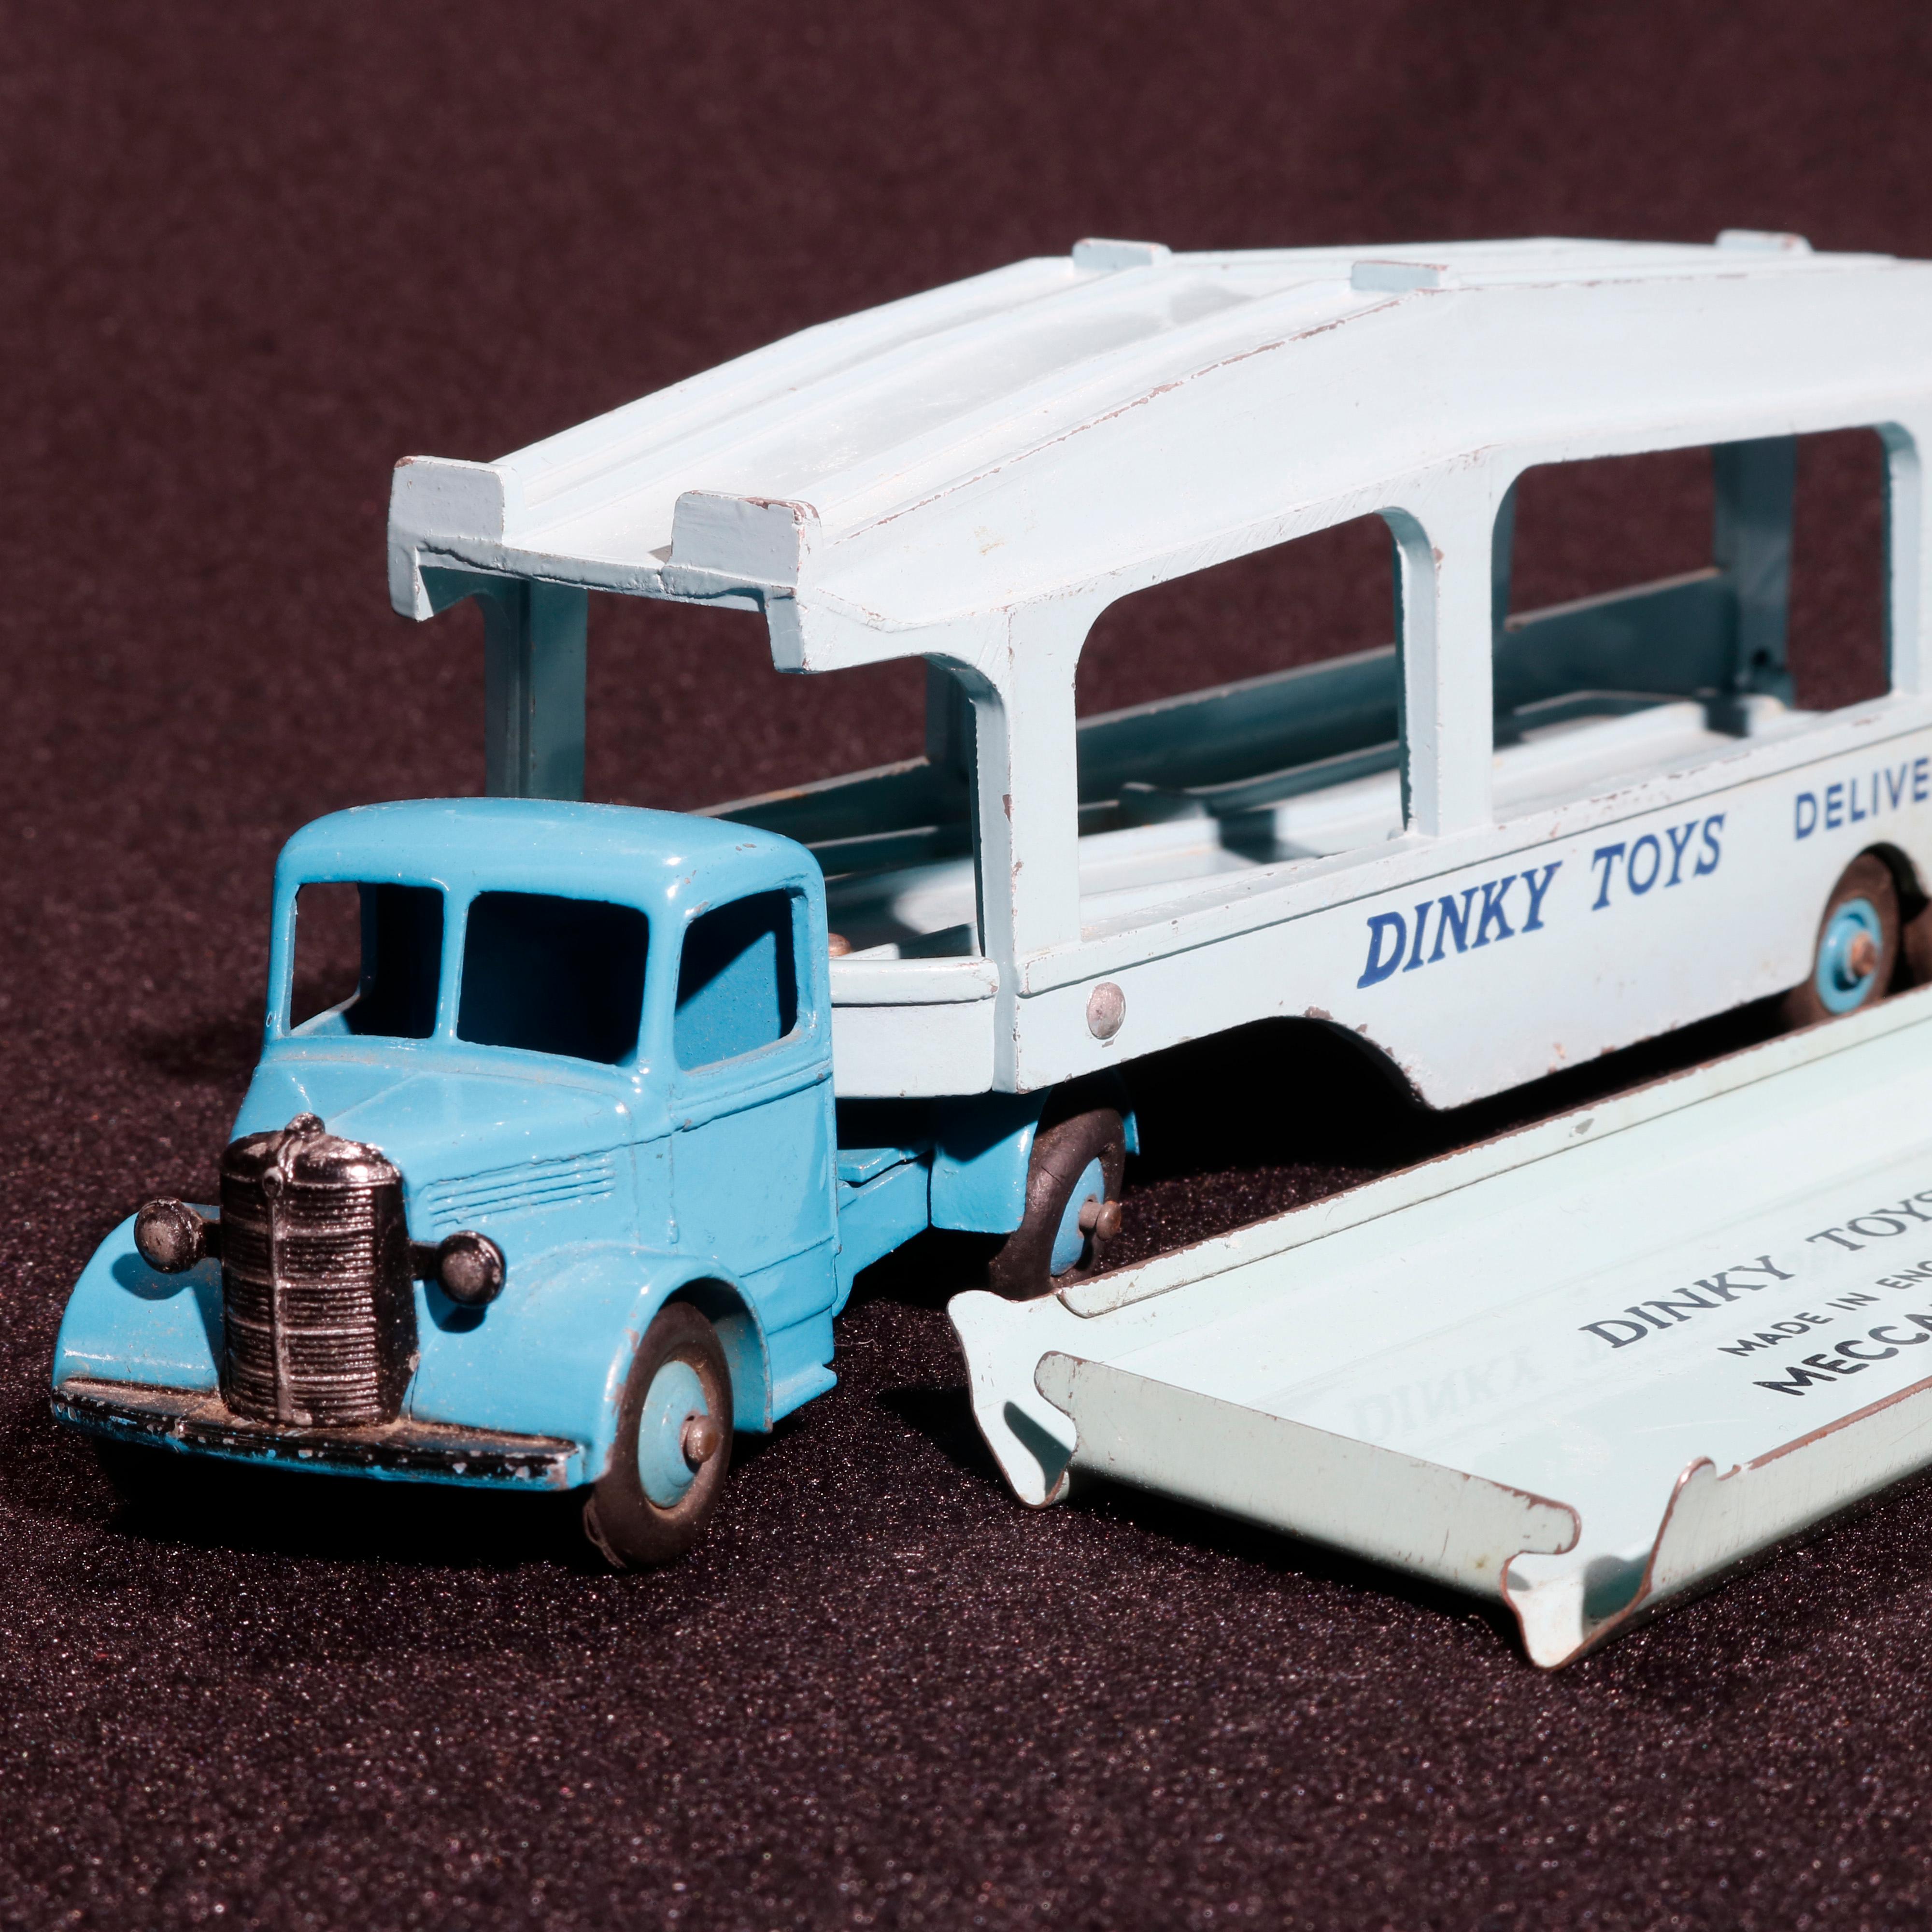 dinky toys delivery service truck